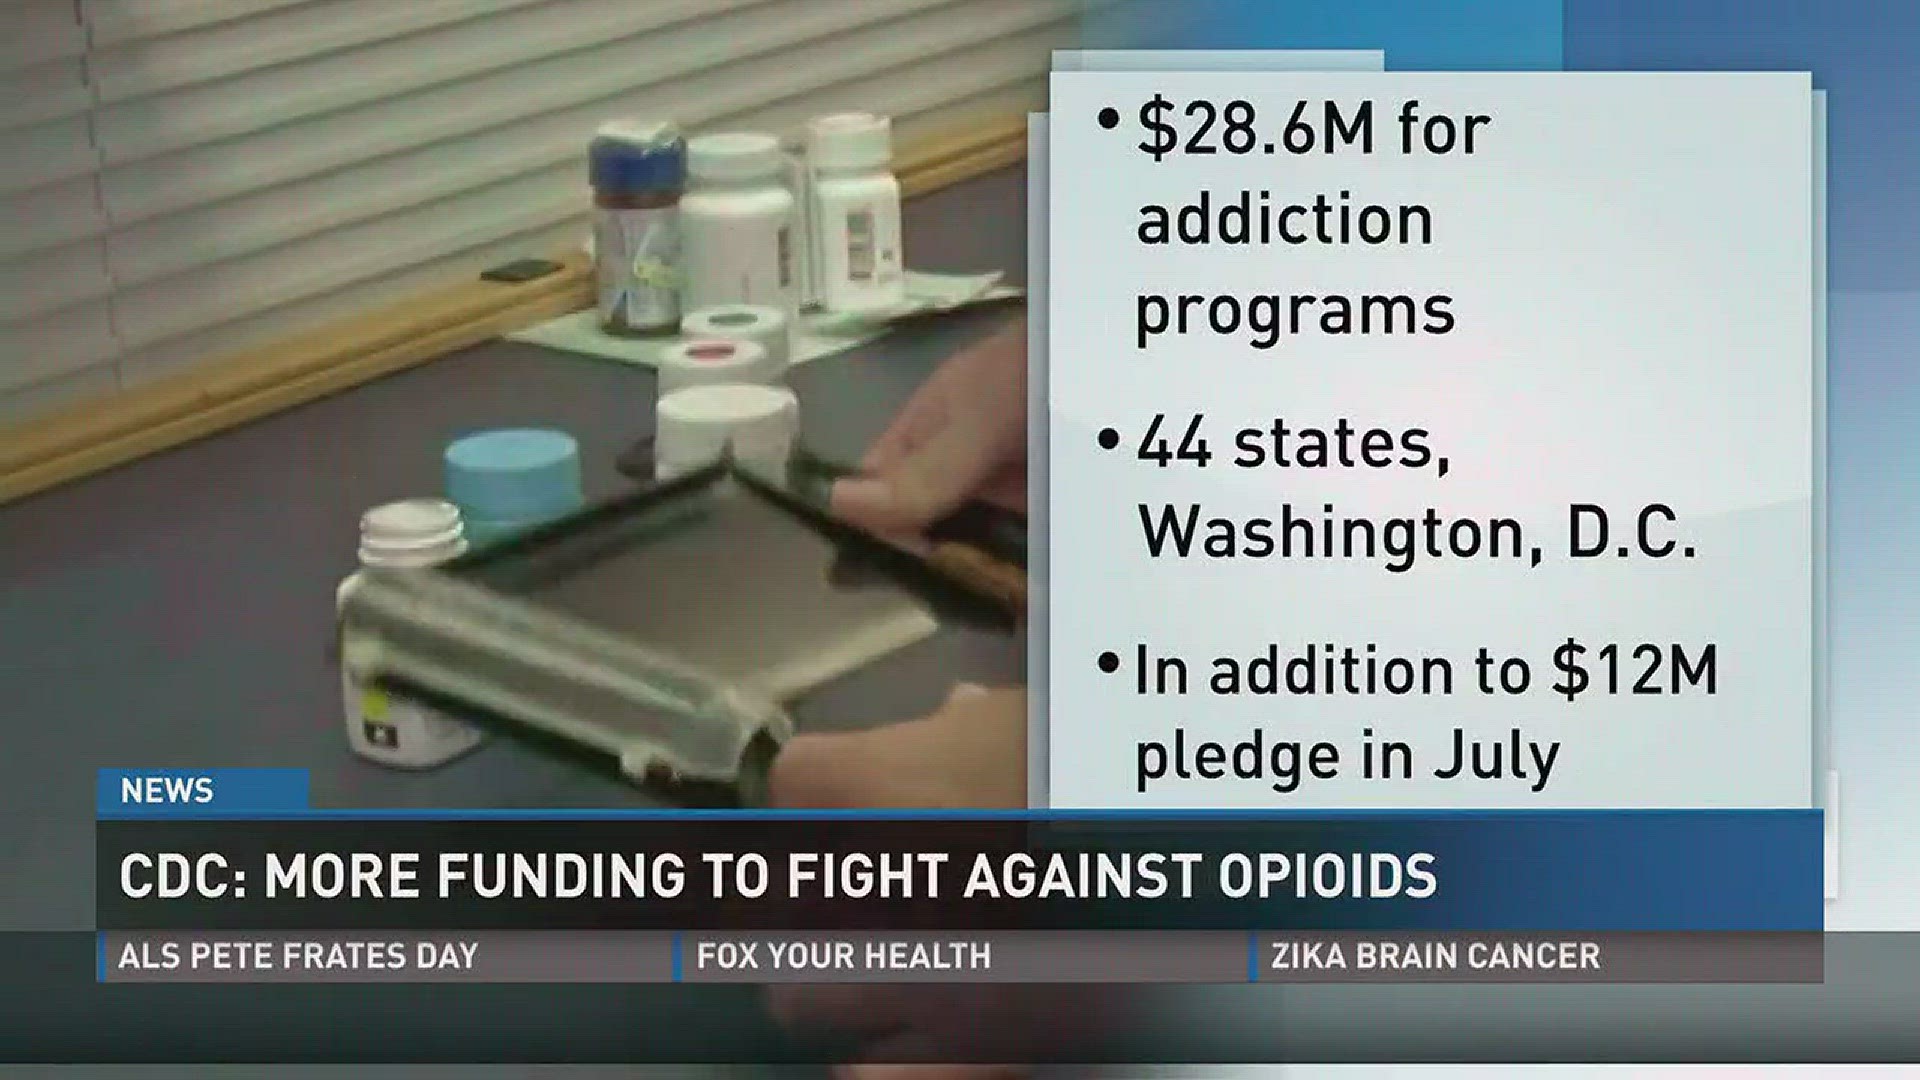 The Centers for Disease Control pledged $28.6 million to 44 states and Washington, D.C. for the opioid epidemic.